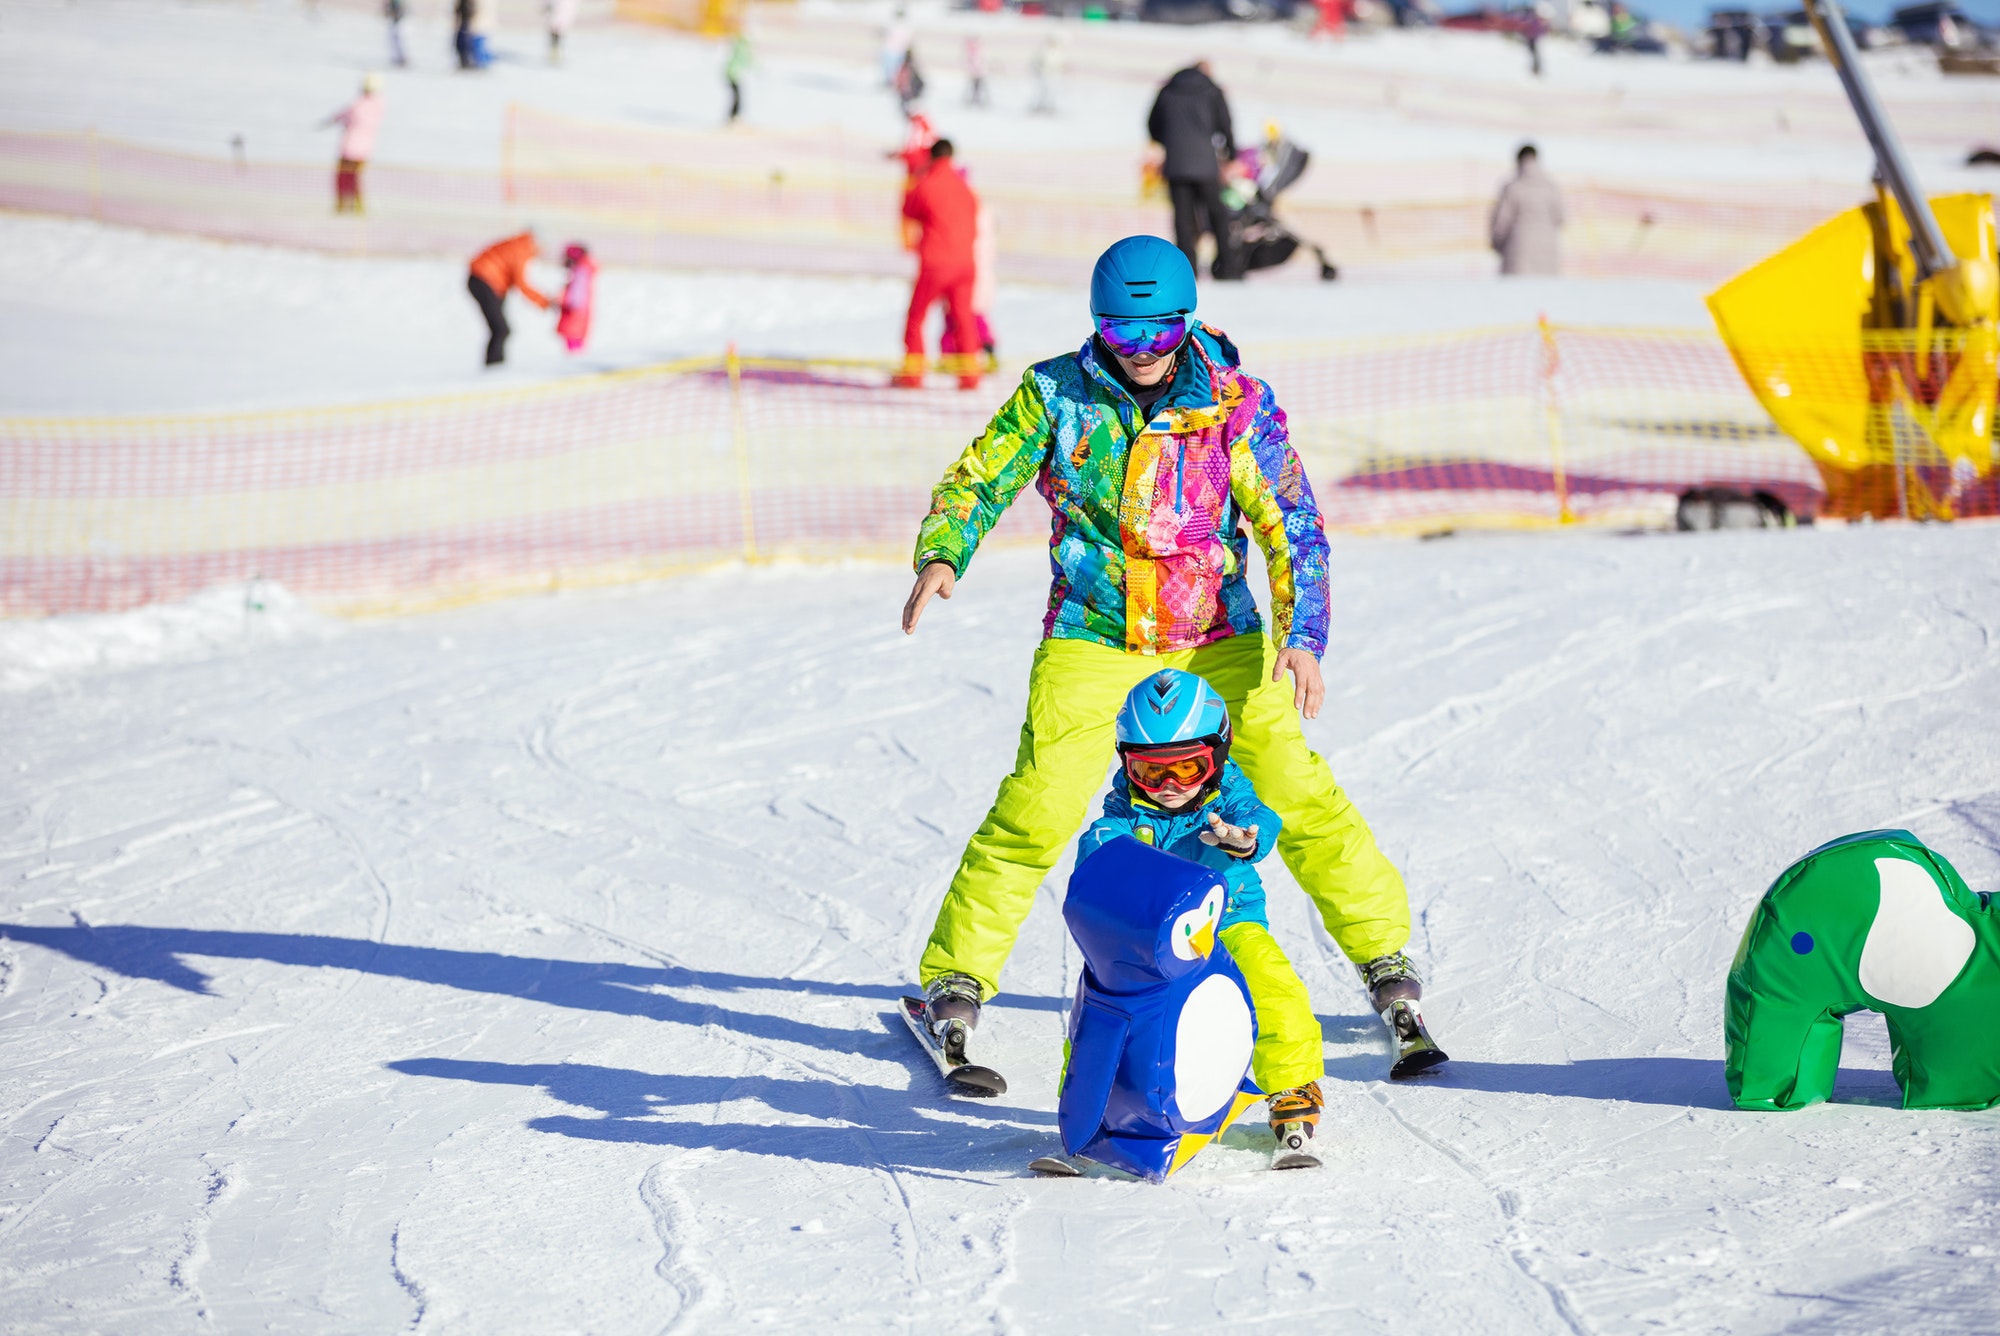 Father teaching little son to ski in children's area